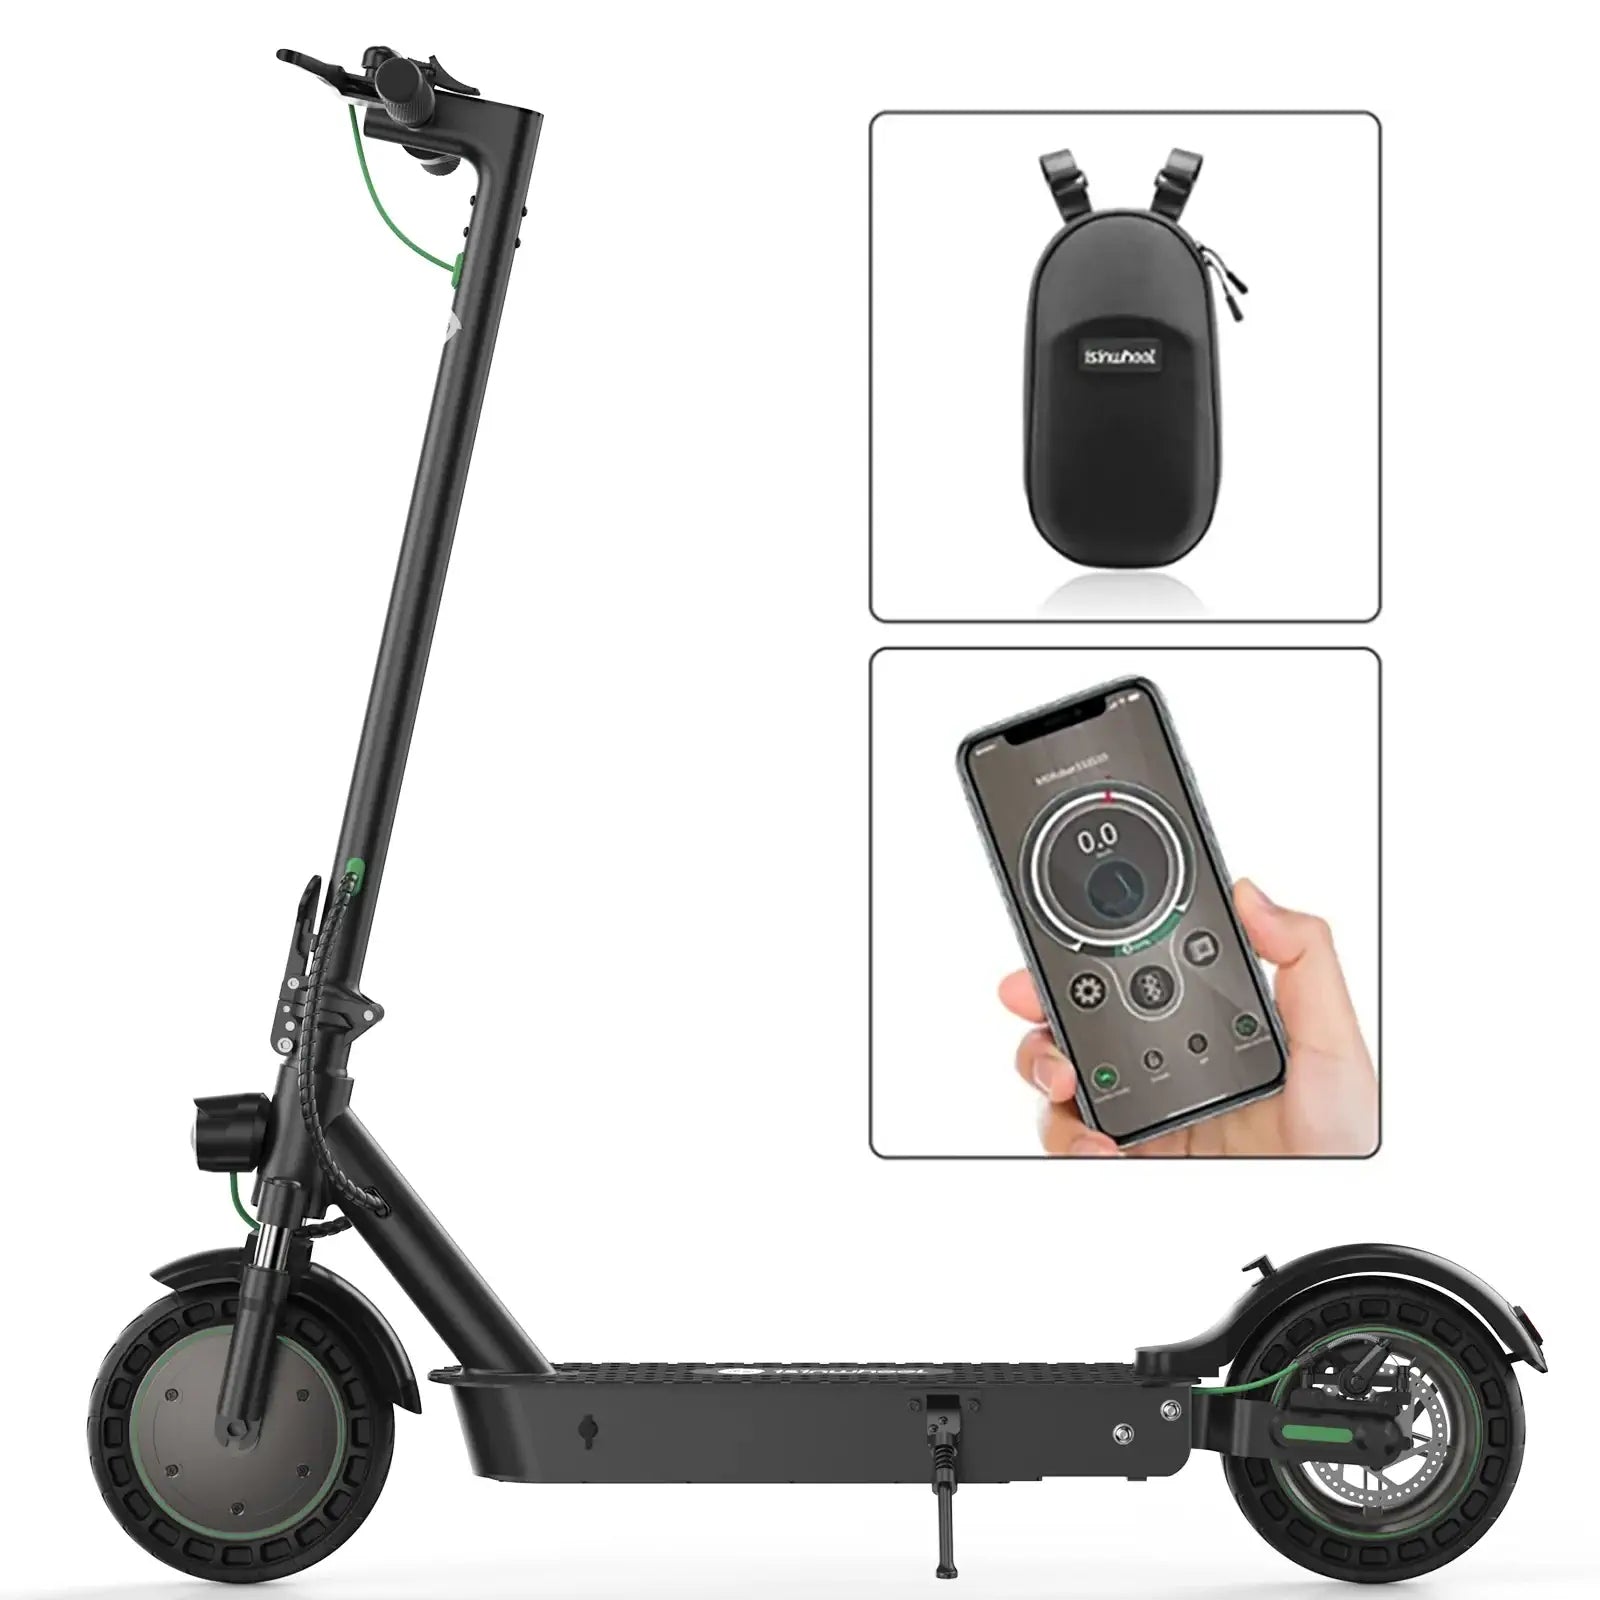  iSinwheel S9MAX 500W Electric Scooter - Street Rides